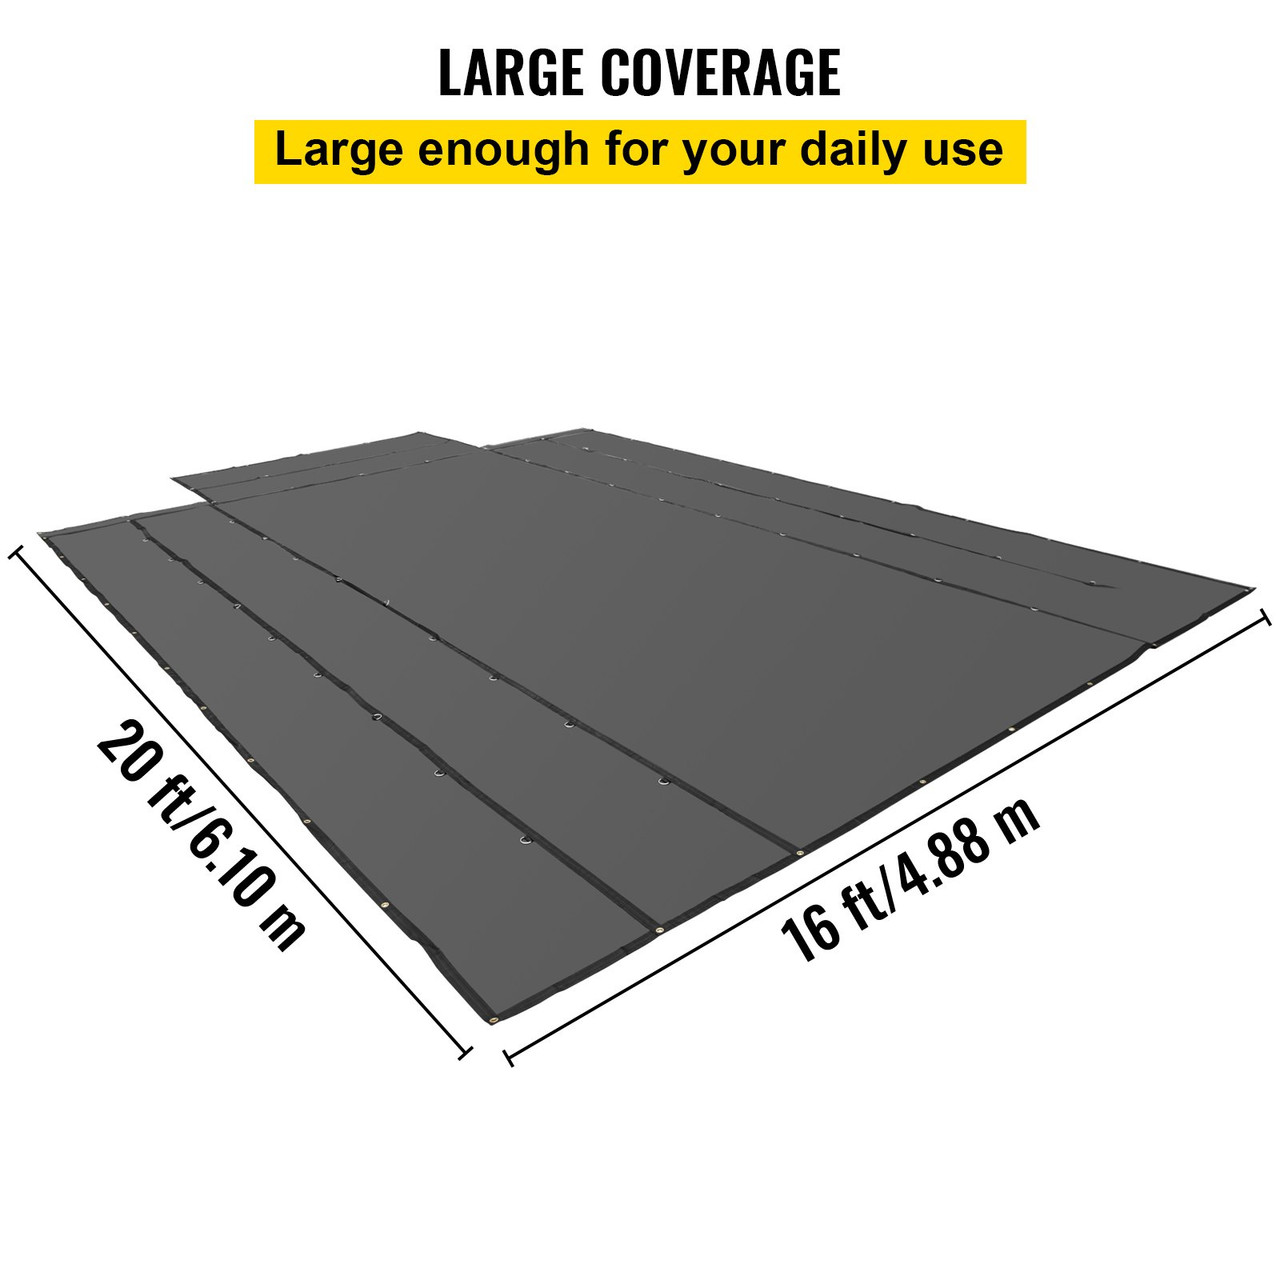 Flatbed Tarps, 18OZ Flatbed Truck Tarp, 16x20 Ft Vinyl Lumber Tarp, Black Heavy Duty Trailer Tarp with Stainless Steel D Rings and a Flap For Trucks, Vans, Small Boats, Machinery & Outdoor Mater